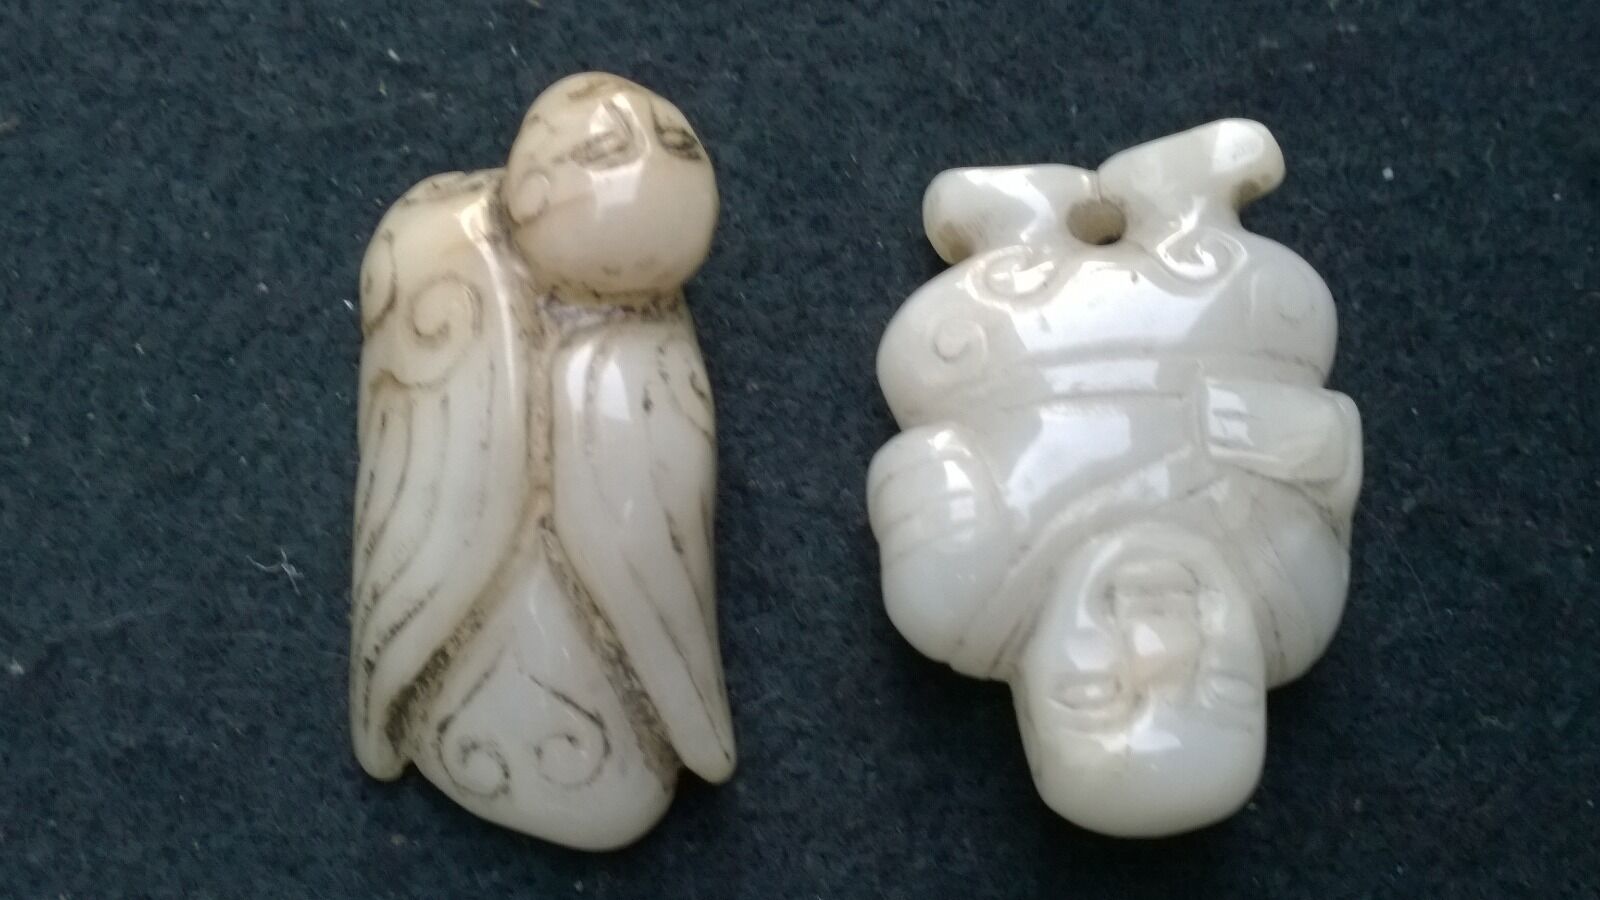 Group of Two Hardstone Quality Serpentine Amulets Bird-Man and Minister. Без бренда - фотография #2